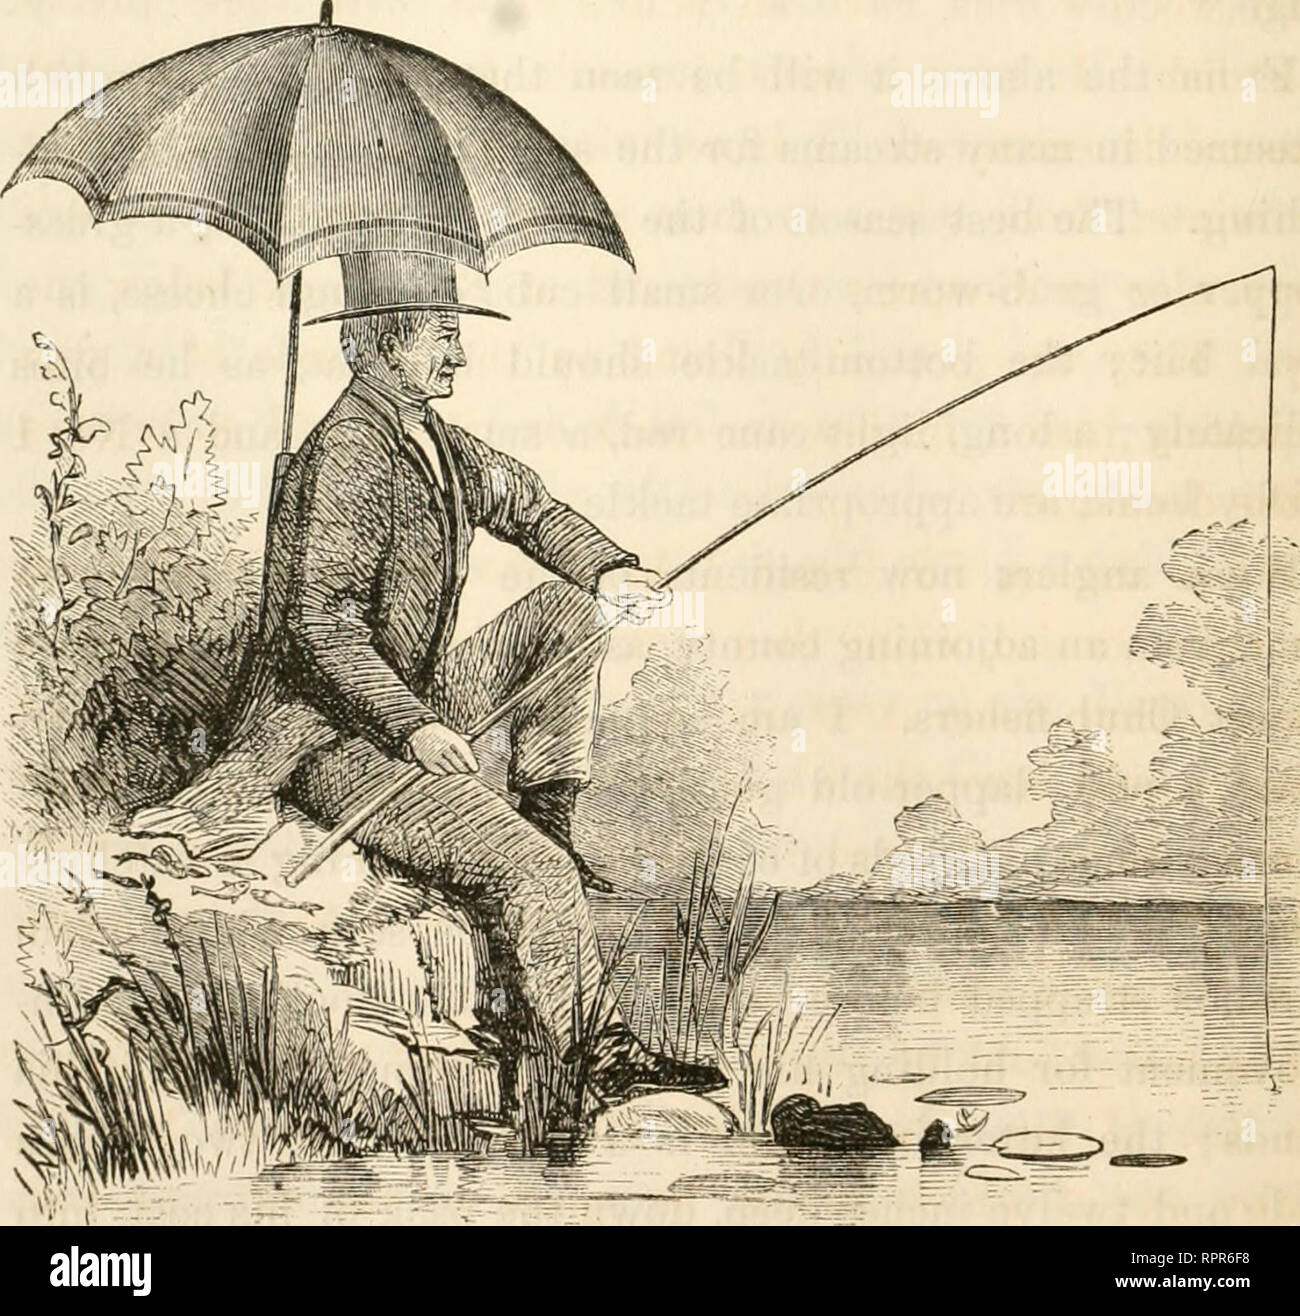 The American angler's book : embracing the natural history of sporting fish,  and the art of taking them : with instructions in fly-fishing, fly-making,  and rod-making, and directions for fish-breeding 